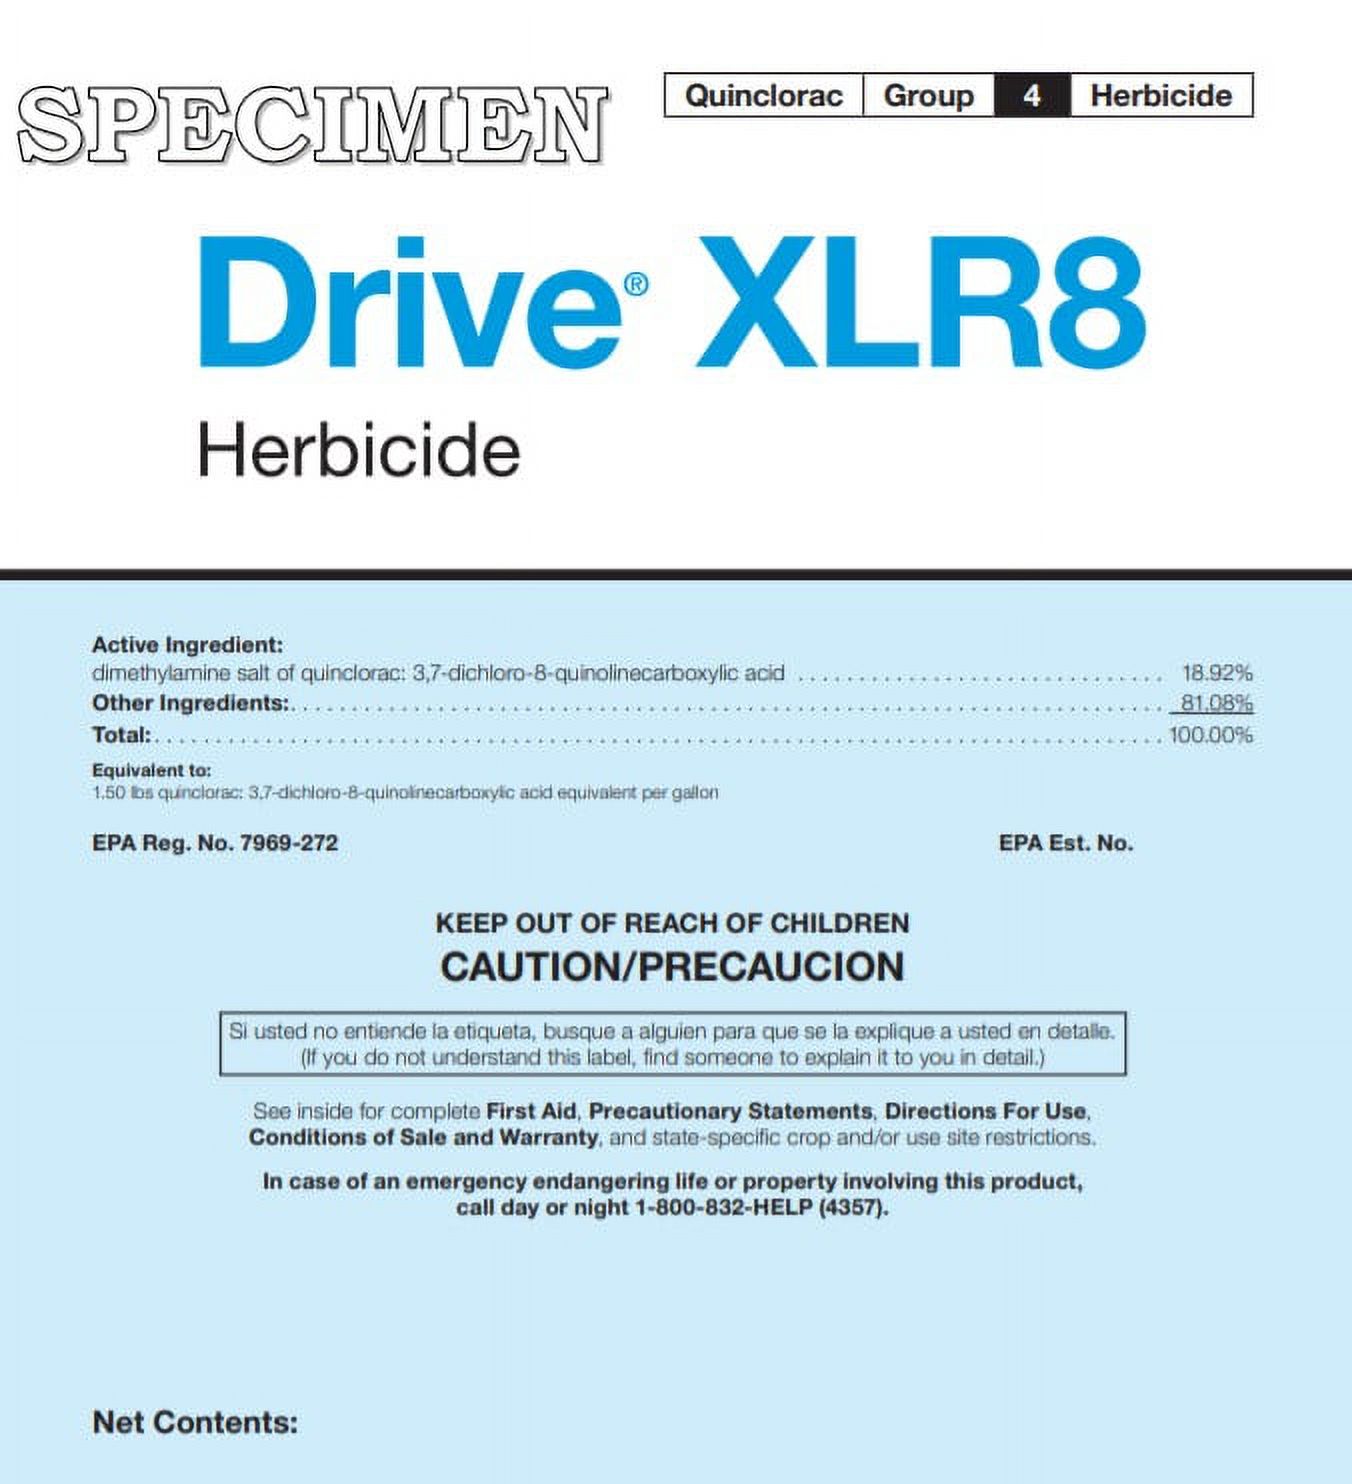 BASF Drive XLR8 Herbicide (1/2 gallon) Effectively Controls Crabgrass and other Broadleaf and Grassy Weeds - image 2 of 2